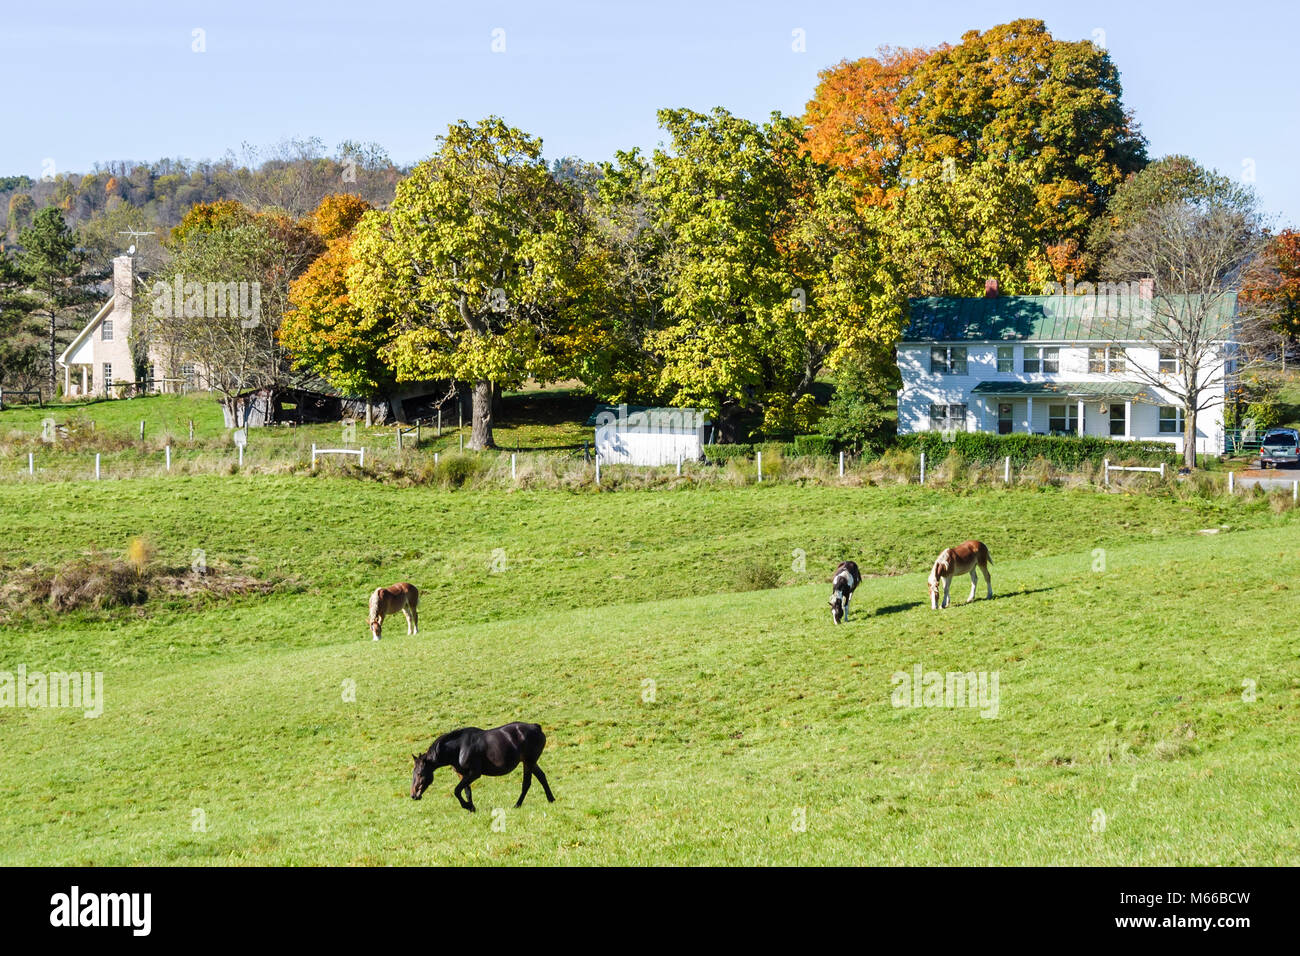 West Virginia,Appalachia Greenbrier County,Frankford,rural lifestyle,country,rustic,scene,horses,domesticated animals,equine,farm,agriculture,fall col Stock Photo